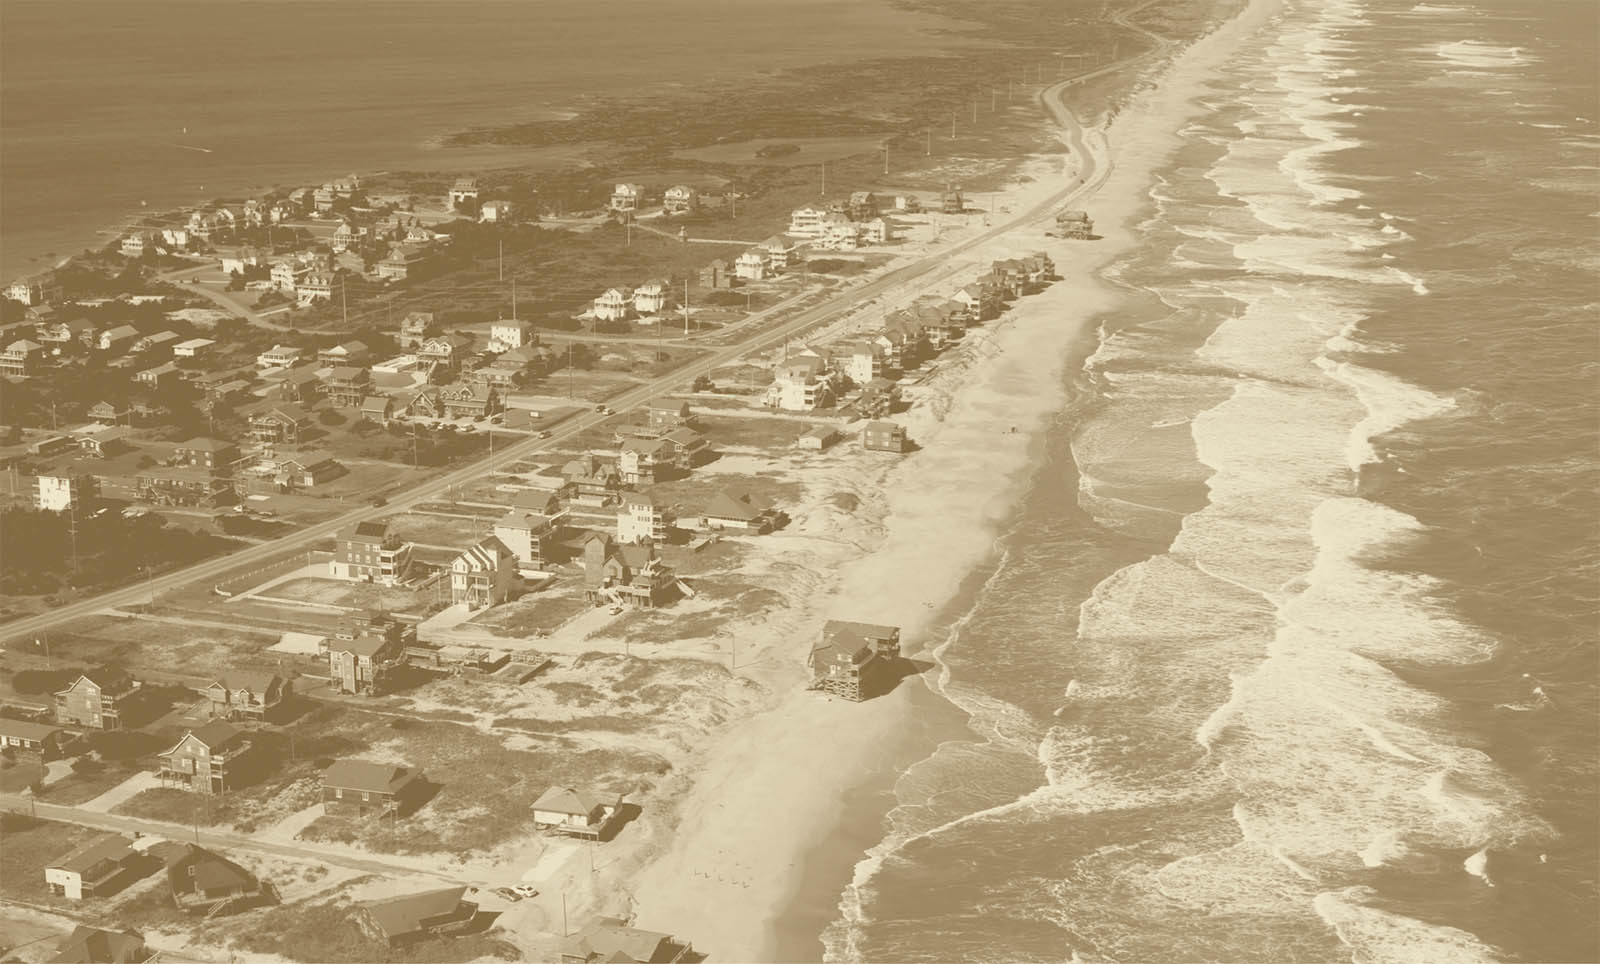 aerial image of housing on a narrow peninsula with waves crashing against the beach